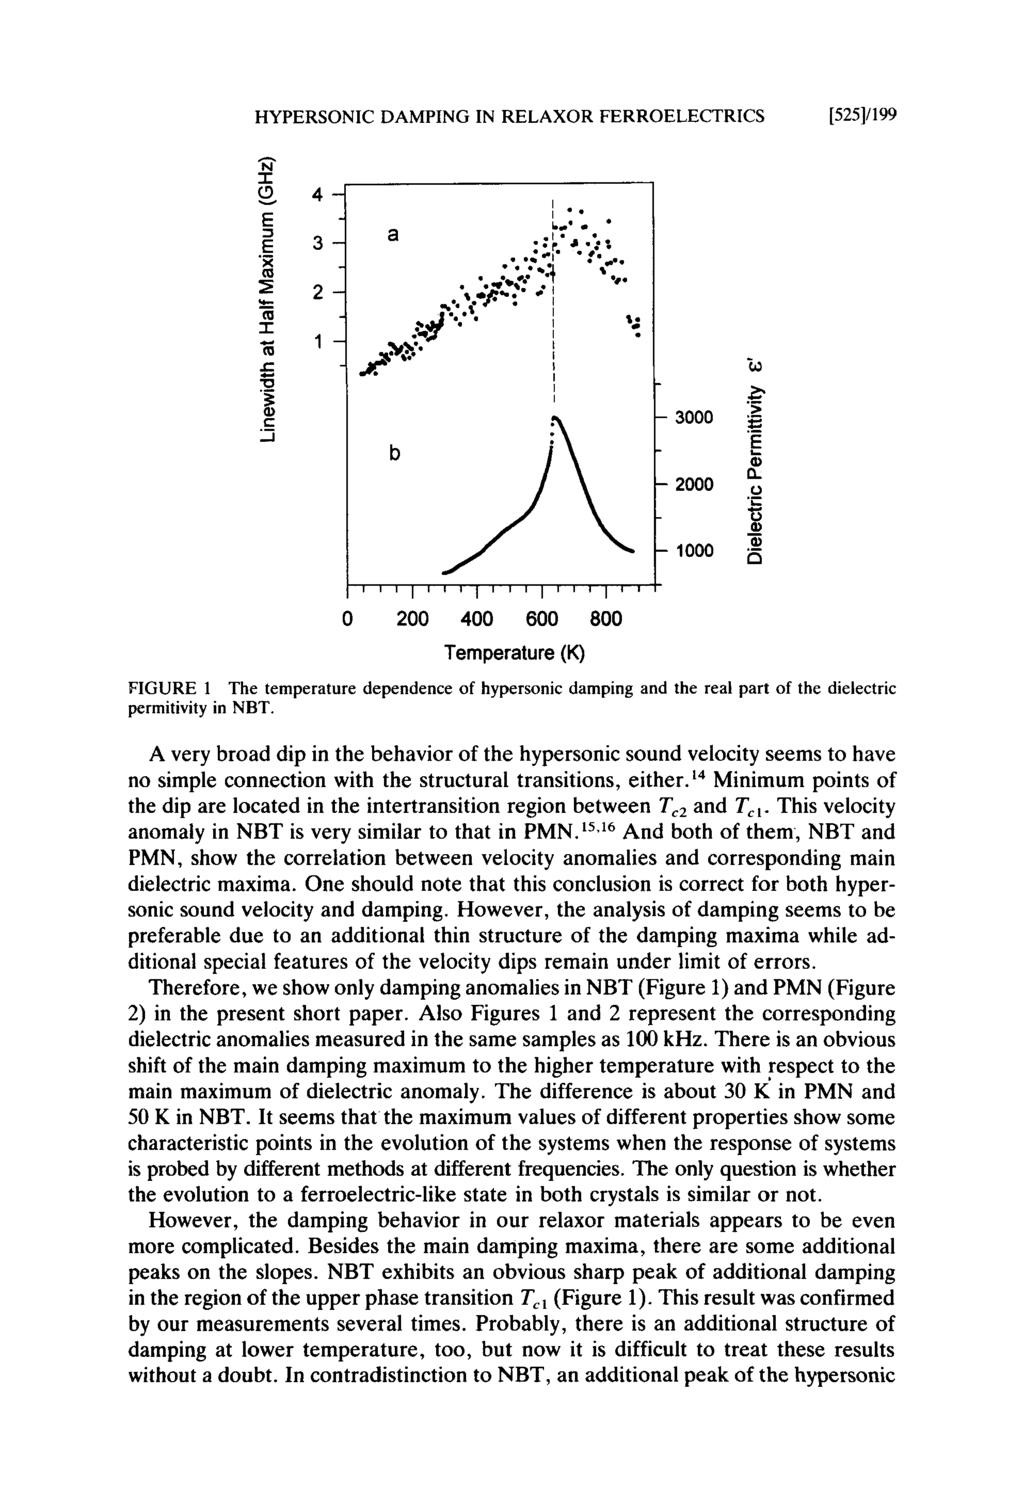 HYPERSONIC DAMPING IN RELAXOR FERROELECTRICS [ 52511 199 I 1 1 1 I I l l I I l l I I I 0 200 400 600 800 Temperature (K) FIGURE 1 The temperature dependence of hypersonic damping and the real part of